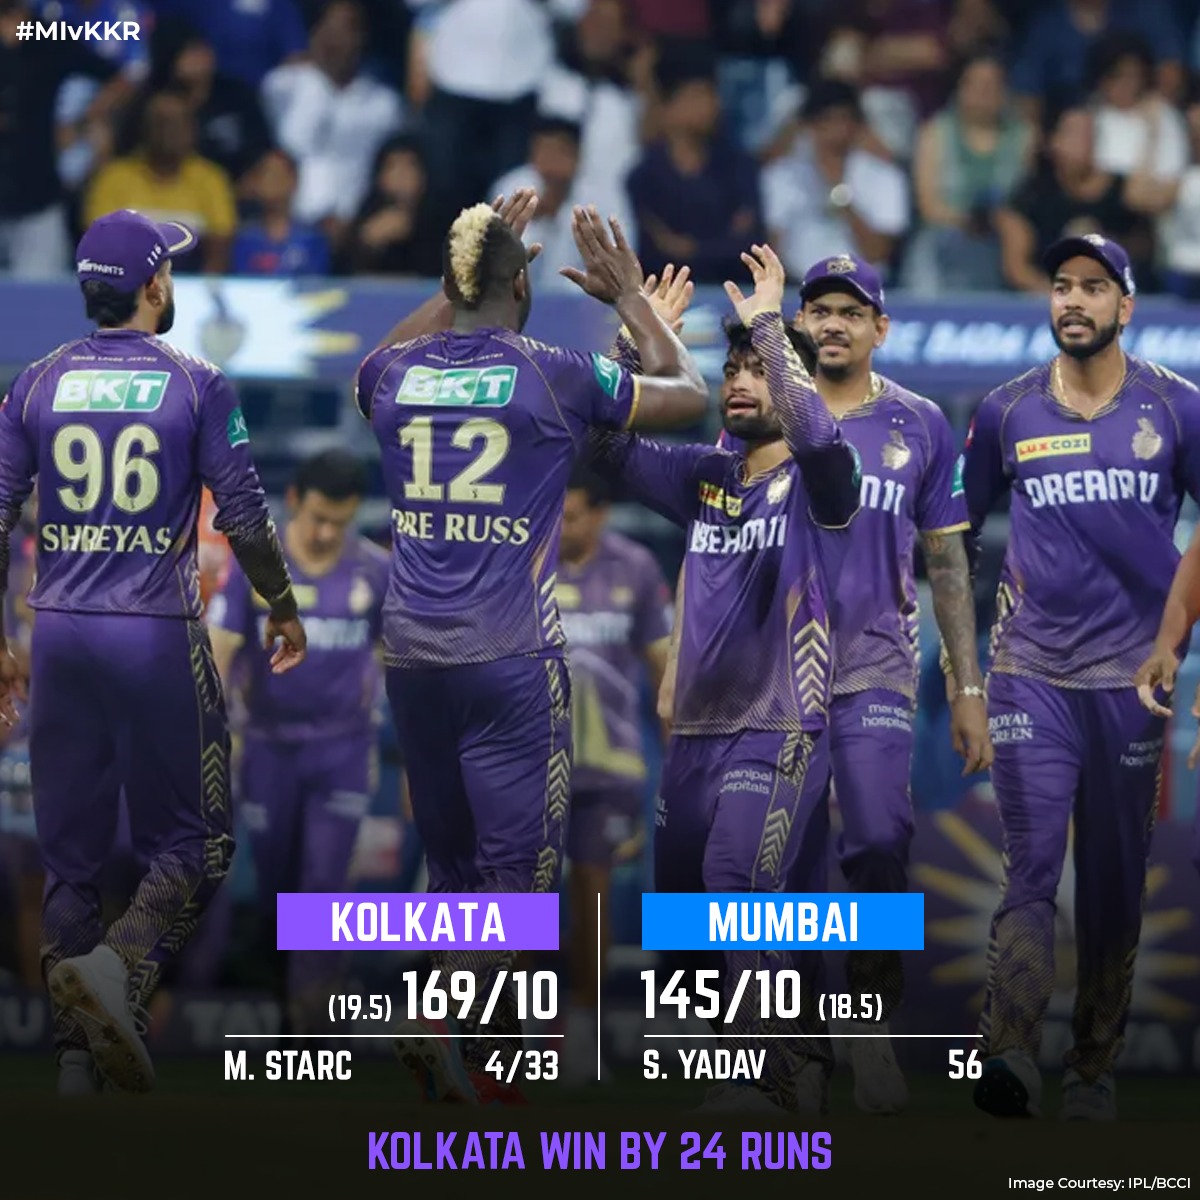 Kolkata breaks the Wankhede jinx! 🔥

12 years of waiting ends with a thrilling win! 💜

#MIvKKR #IPL #IPL2023